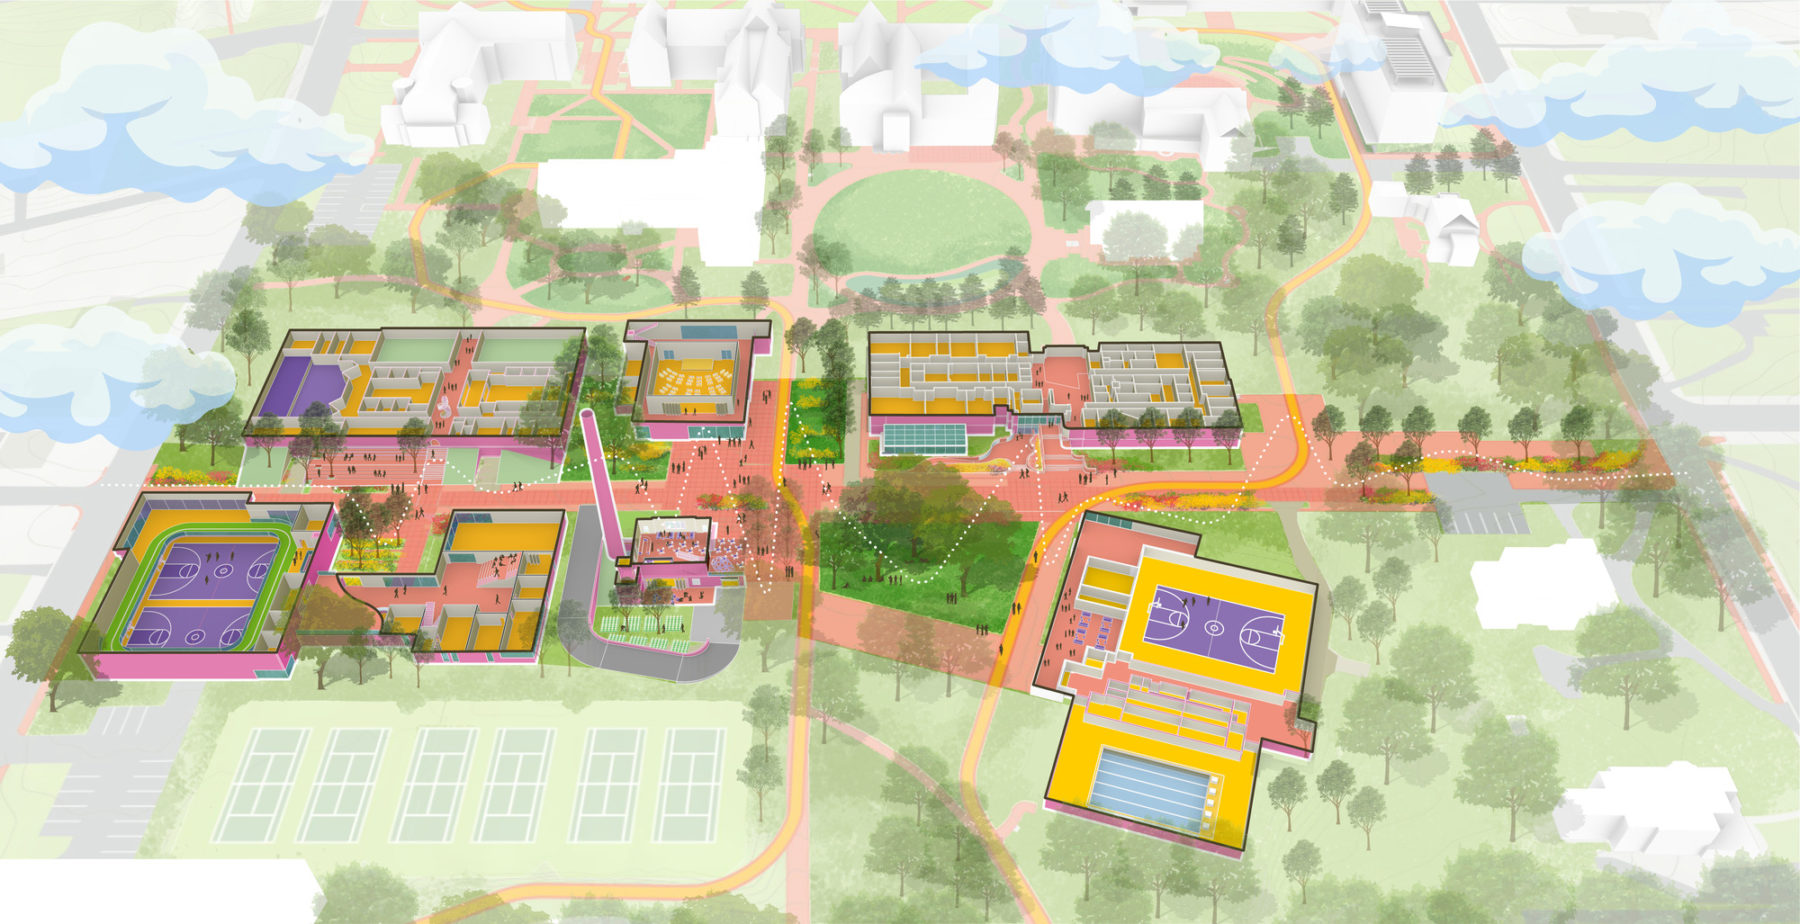 Aerial view showing different facilities and amenities